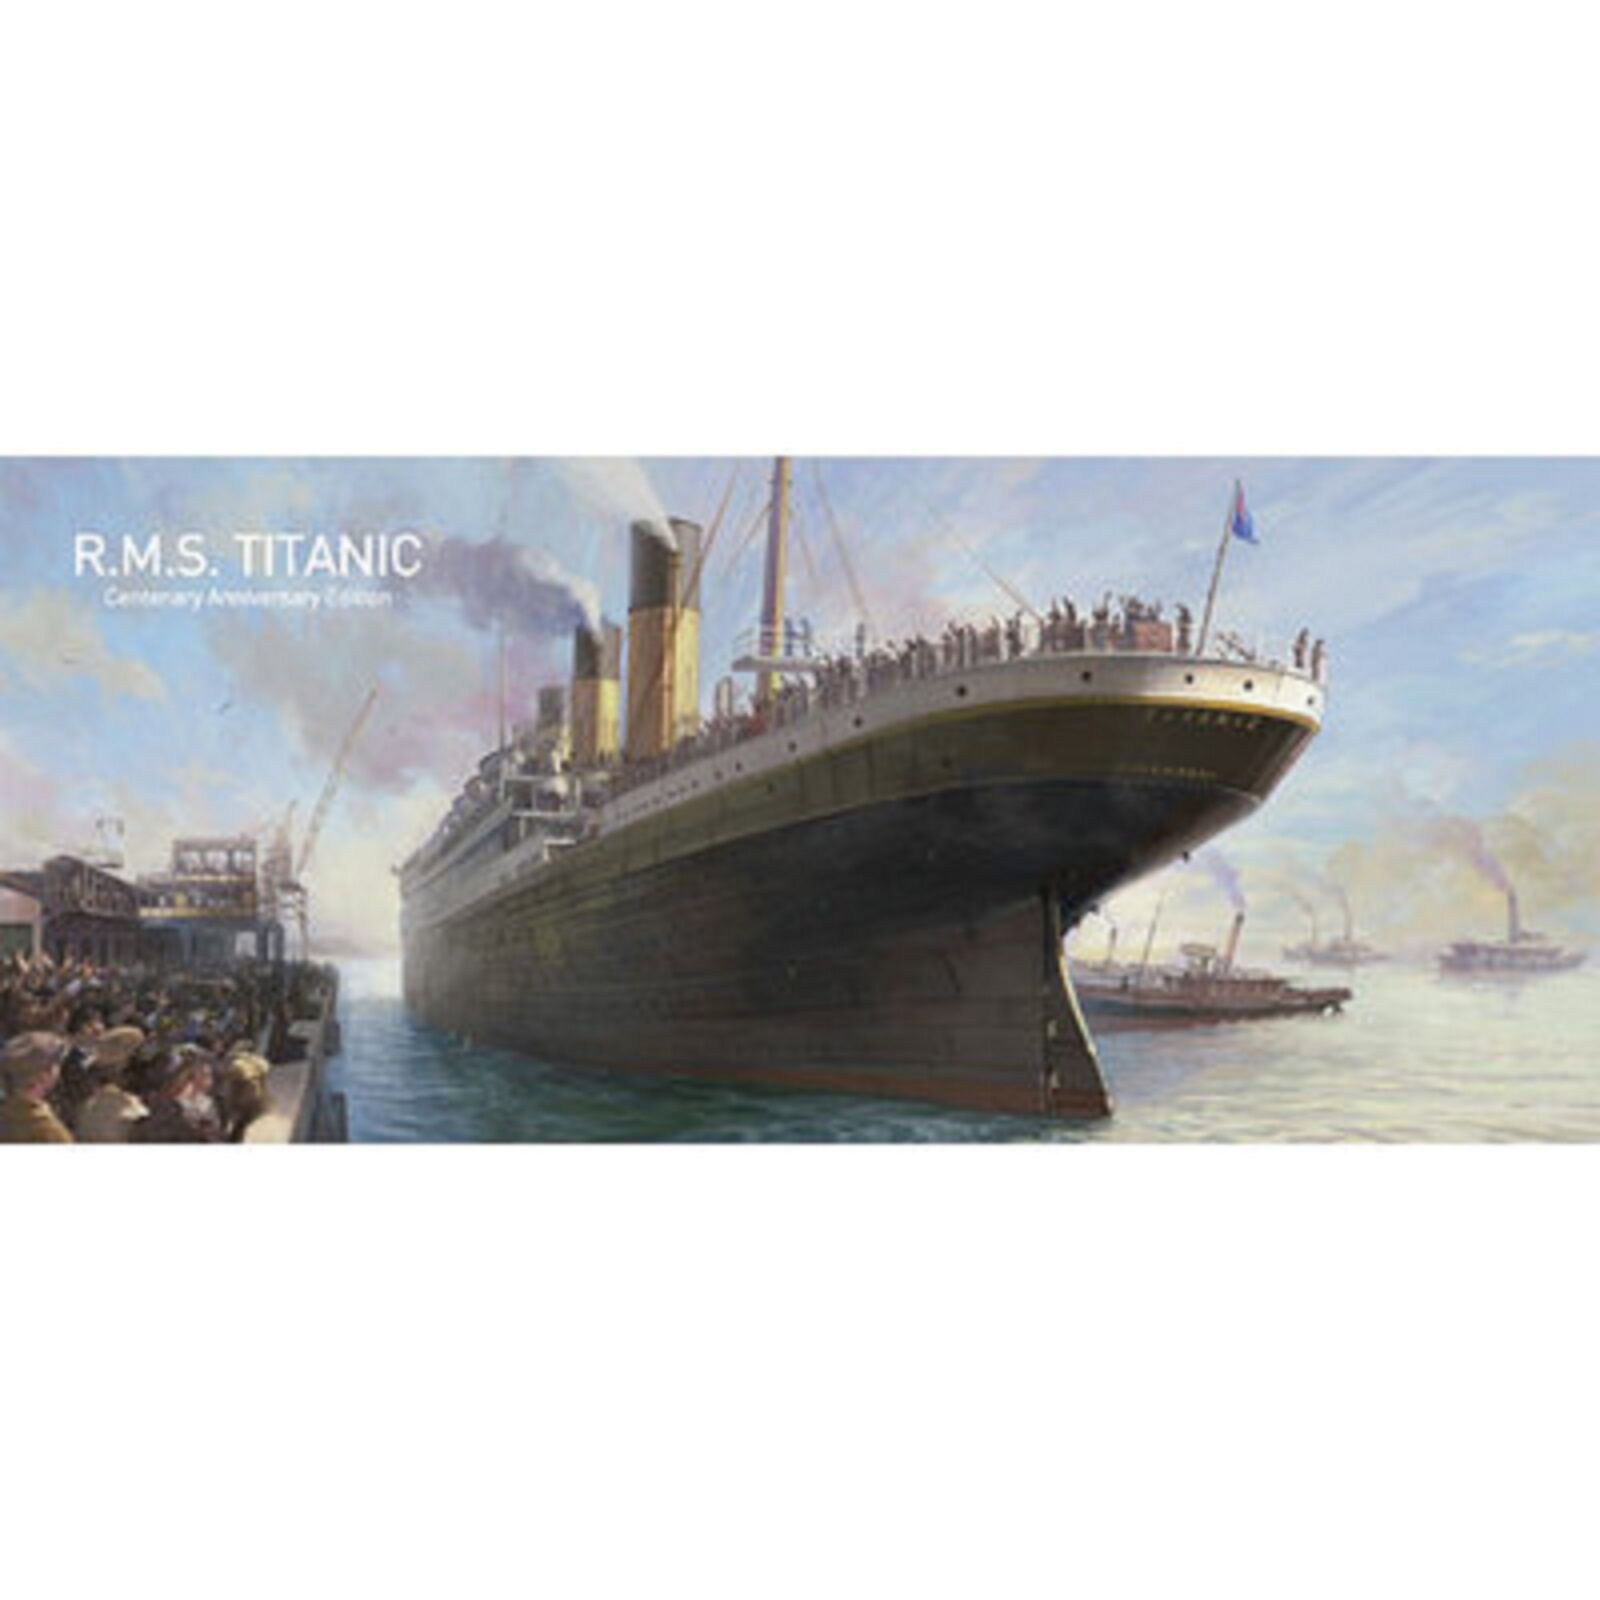 ACADEMY 1/400 RMS TITANIC CENTENARY EDITION 1 OF 5000 KIT # 14202 FACTORY SEALED